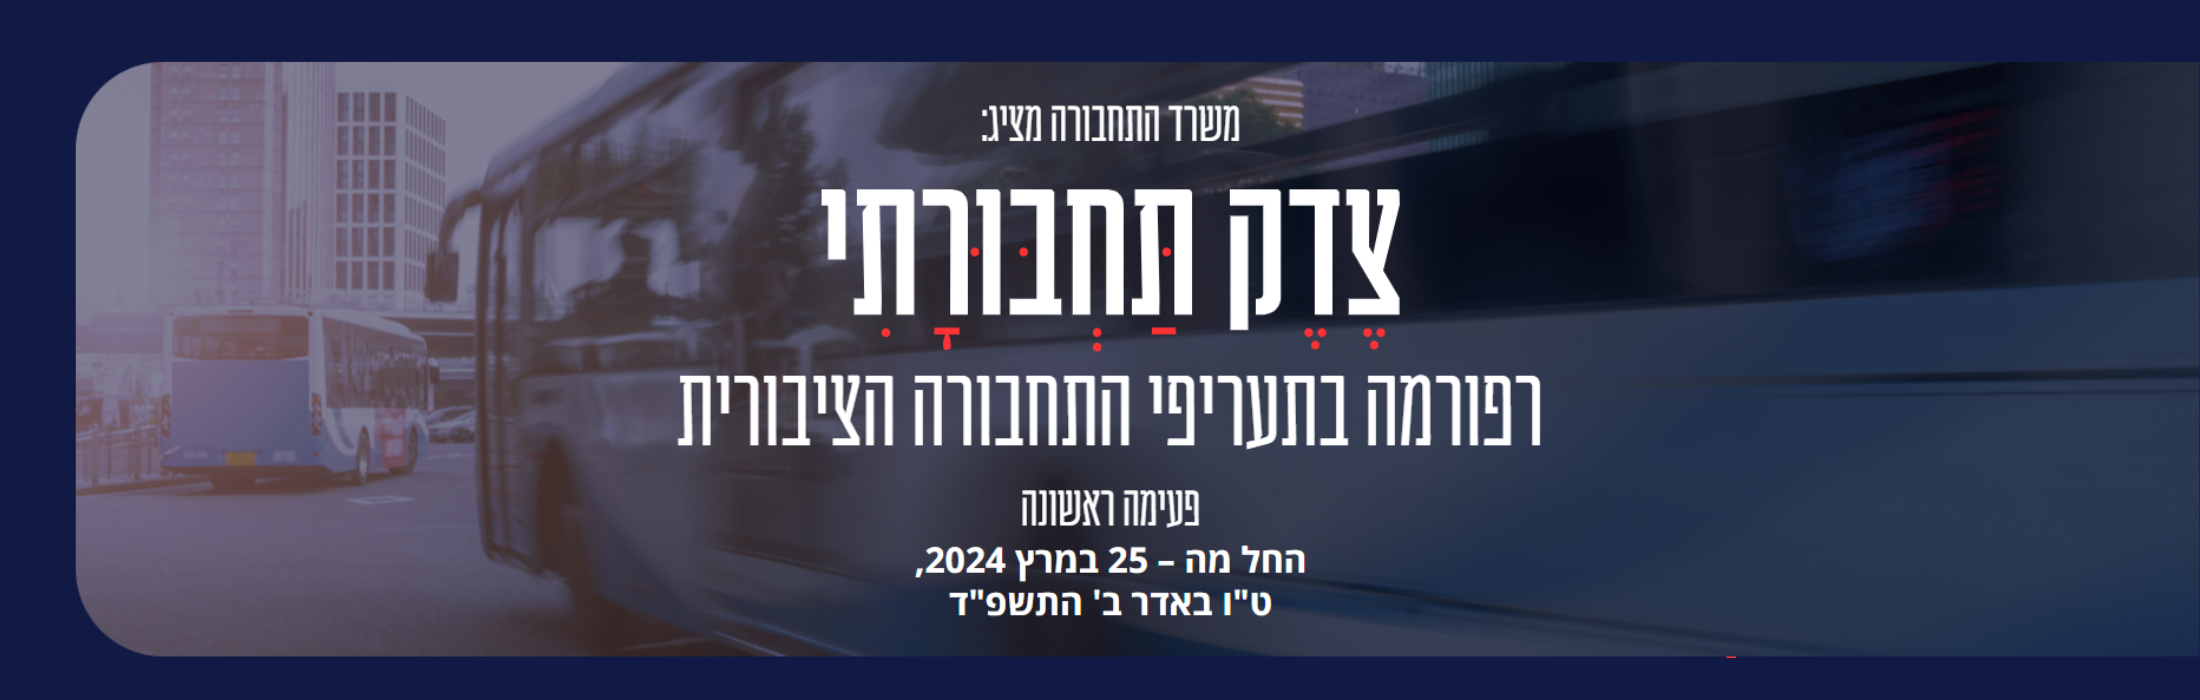 https://www.michpalyeda.co.il/wp-content/uploads/2024/04/רפורמת-מחירי-התחבורה-הציבורית.png